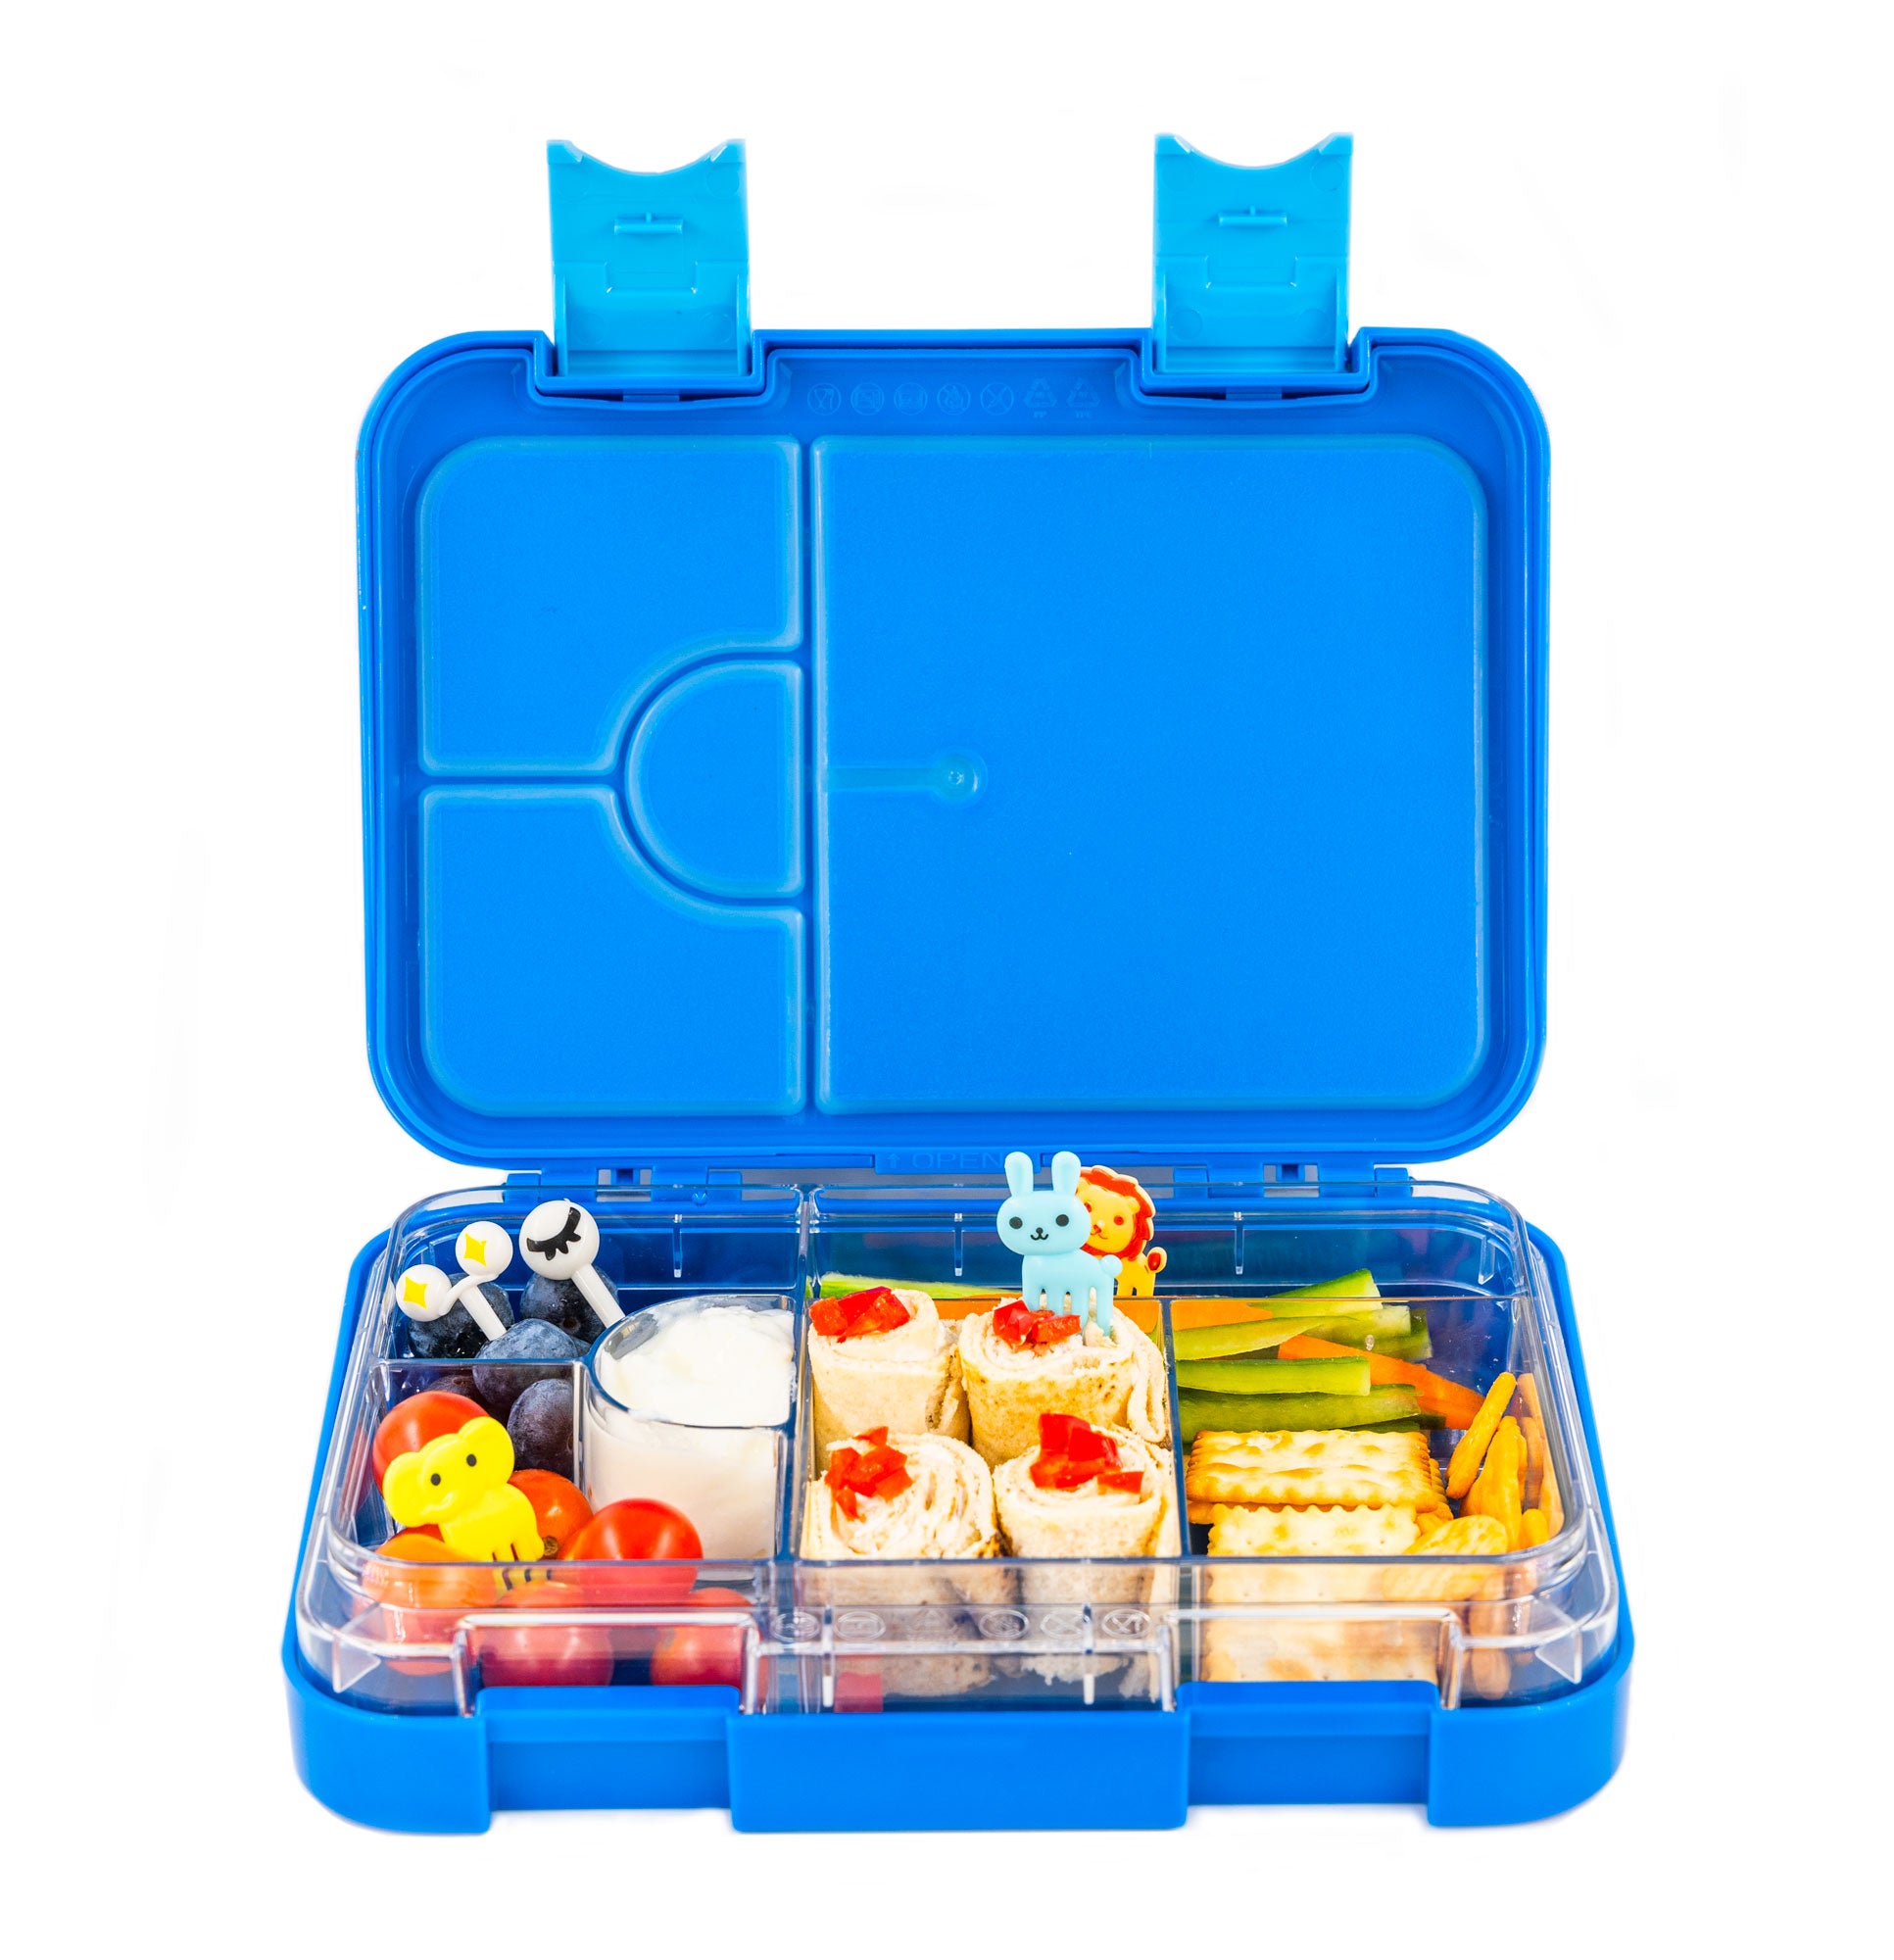 Snack Attack Bento Box or Lunch Boxes for Kids by Snack Attack 4